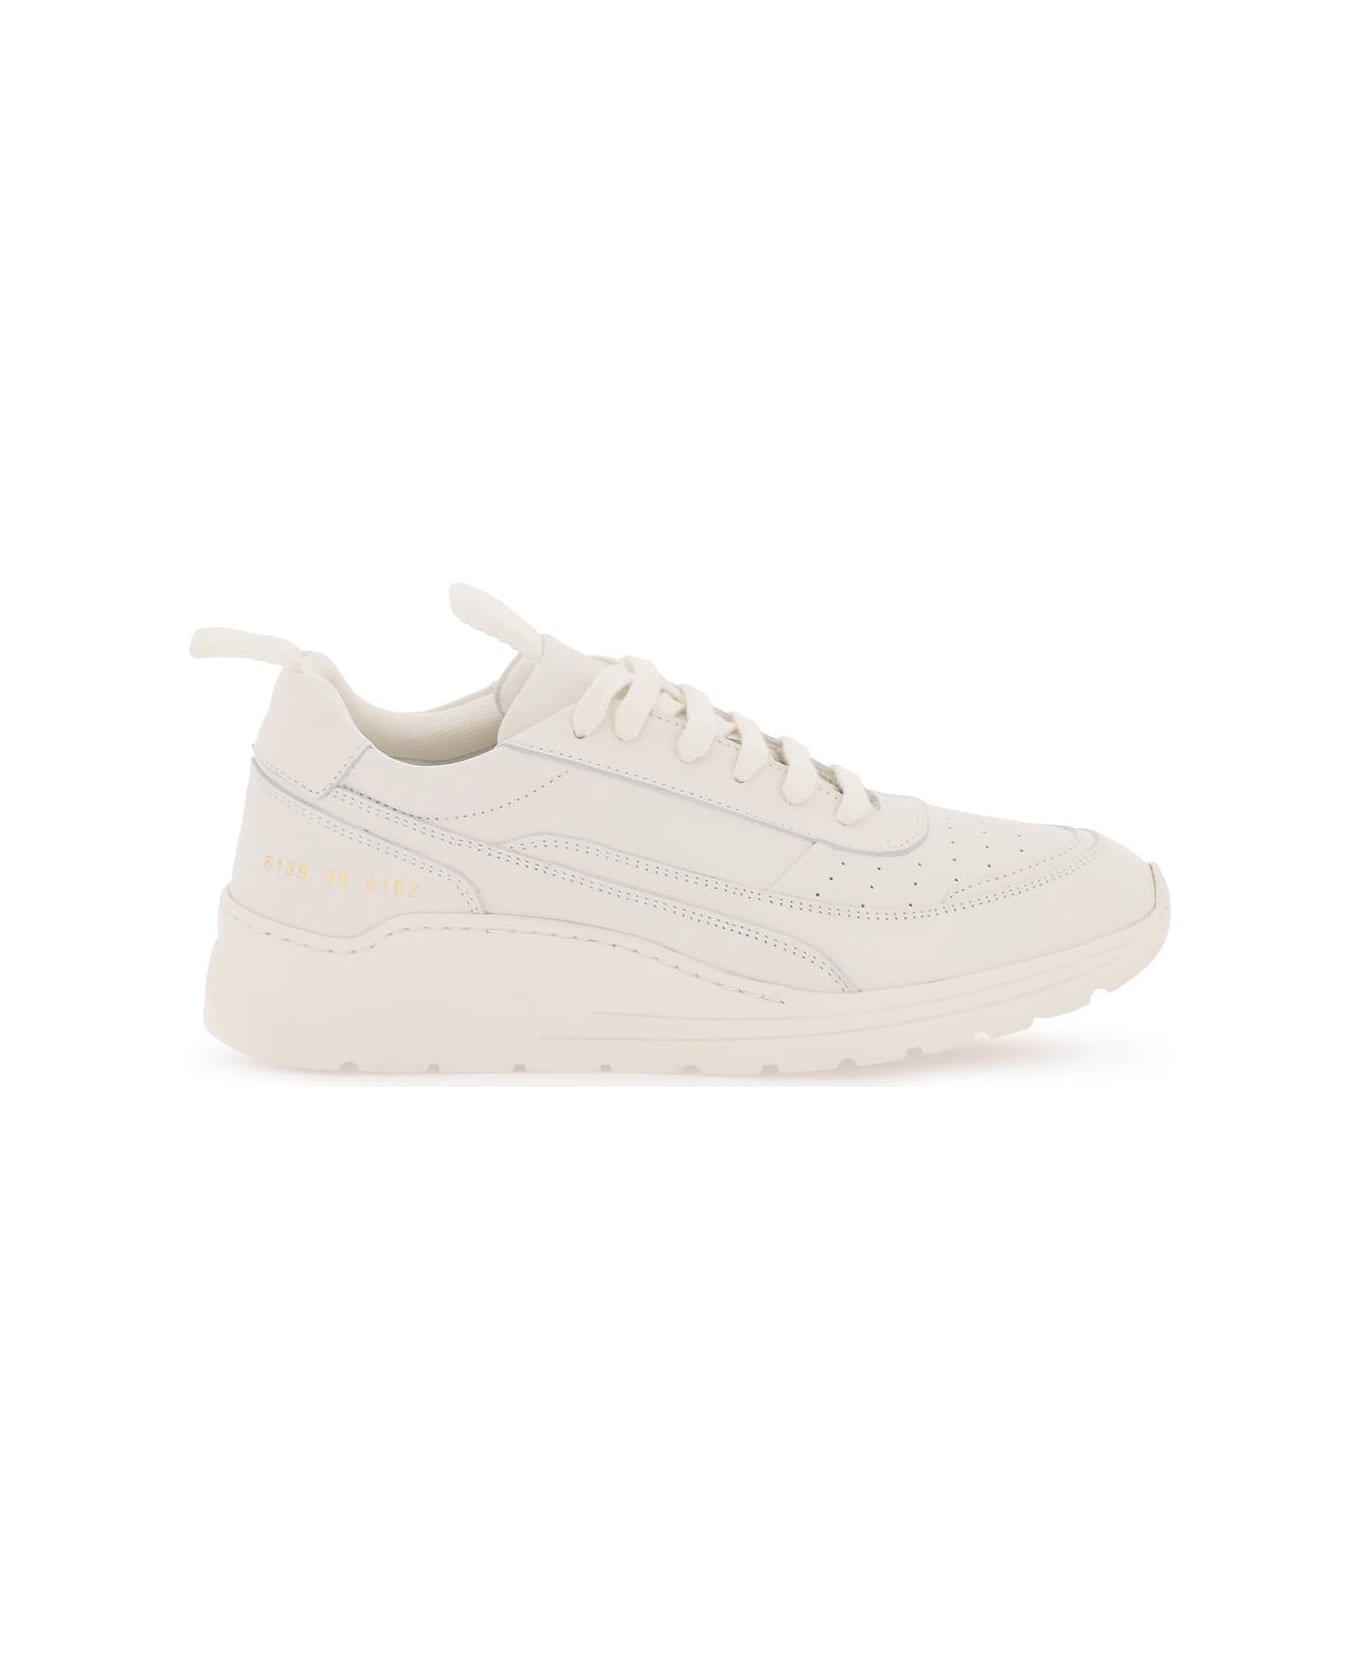 Common Projects Track 90 Sneakers - BONE WHITE (White) スニーカー